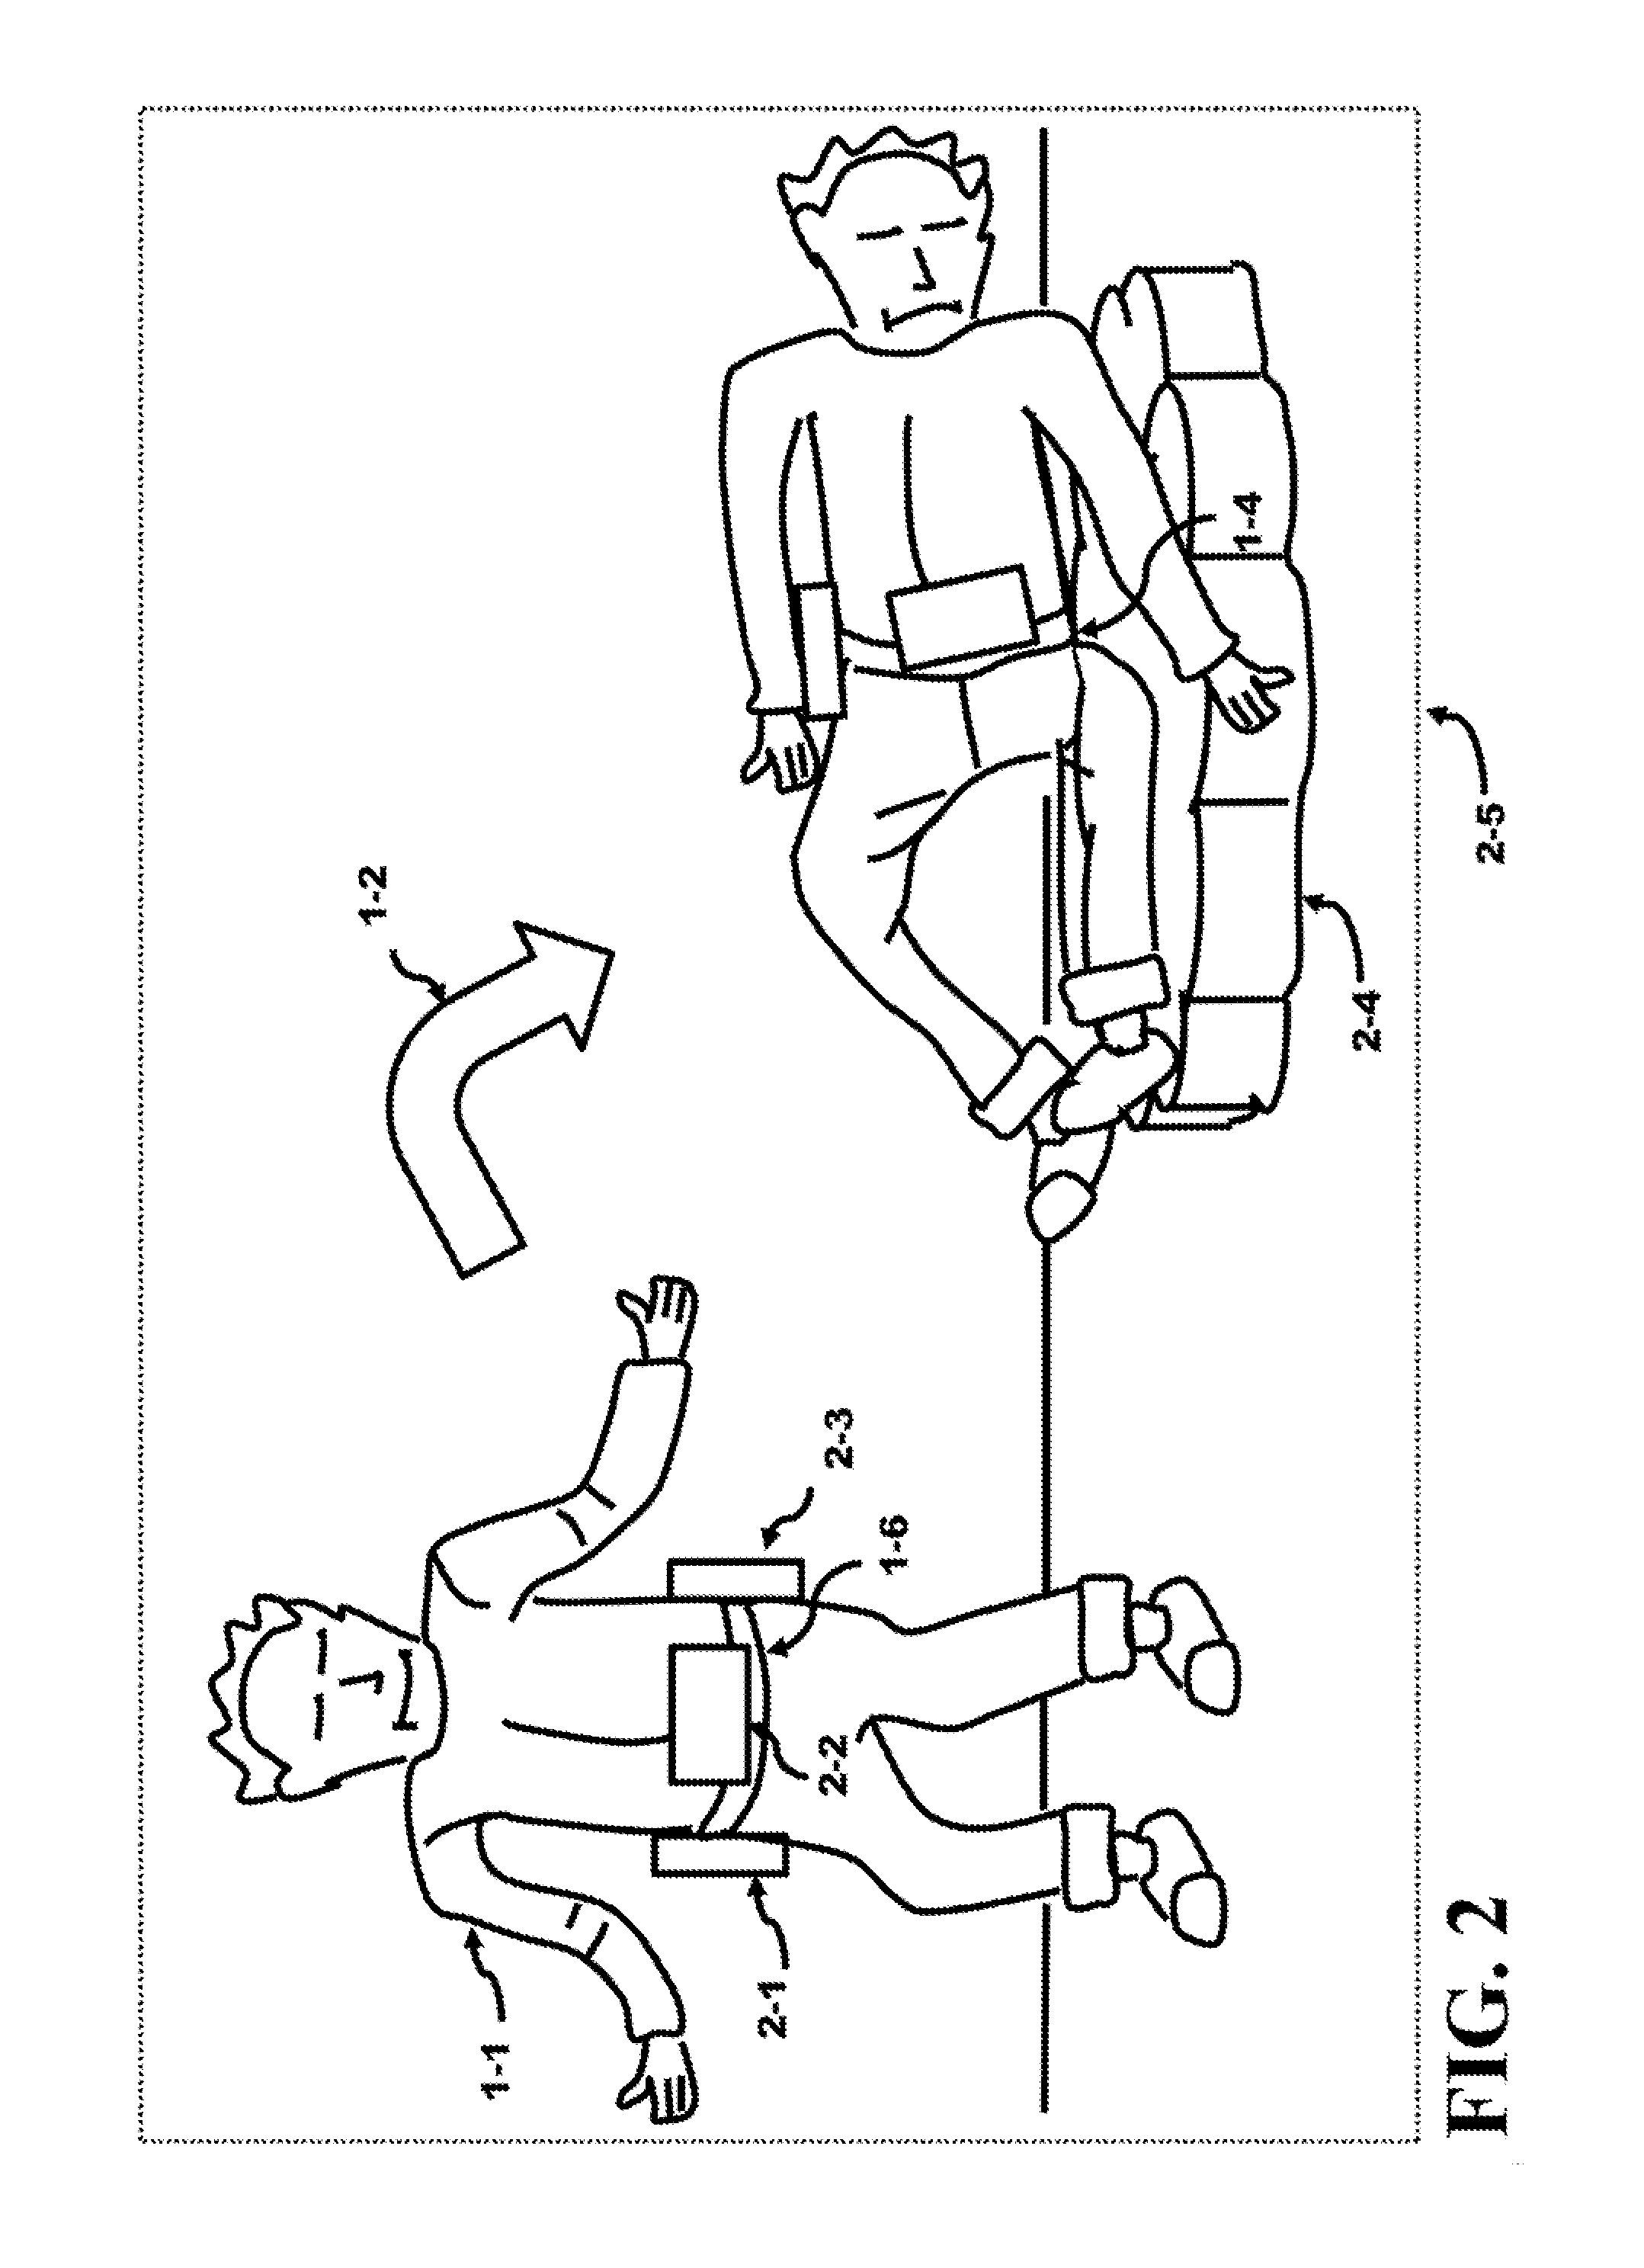 Method and Apparatus of Preventing a Fall or Minimizing the Impact of the Fall of an Individual